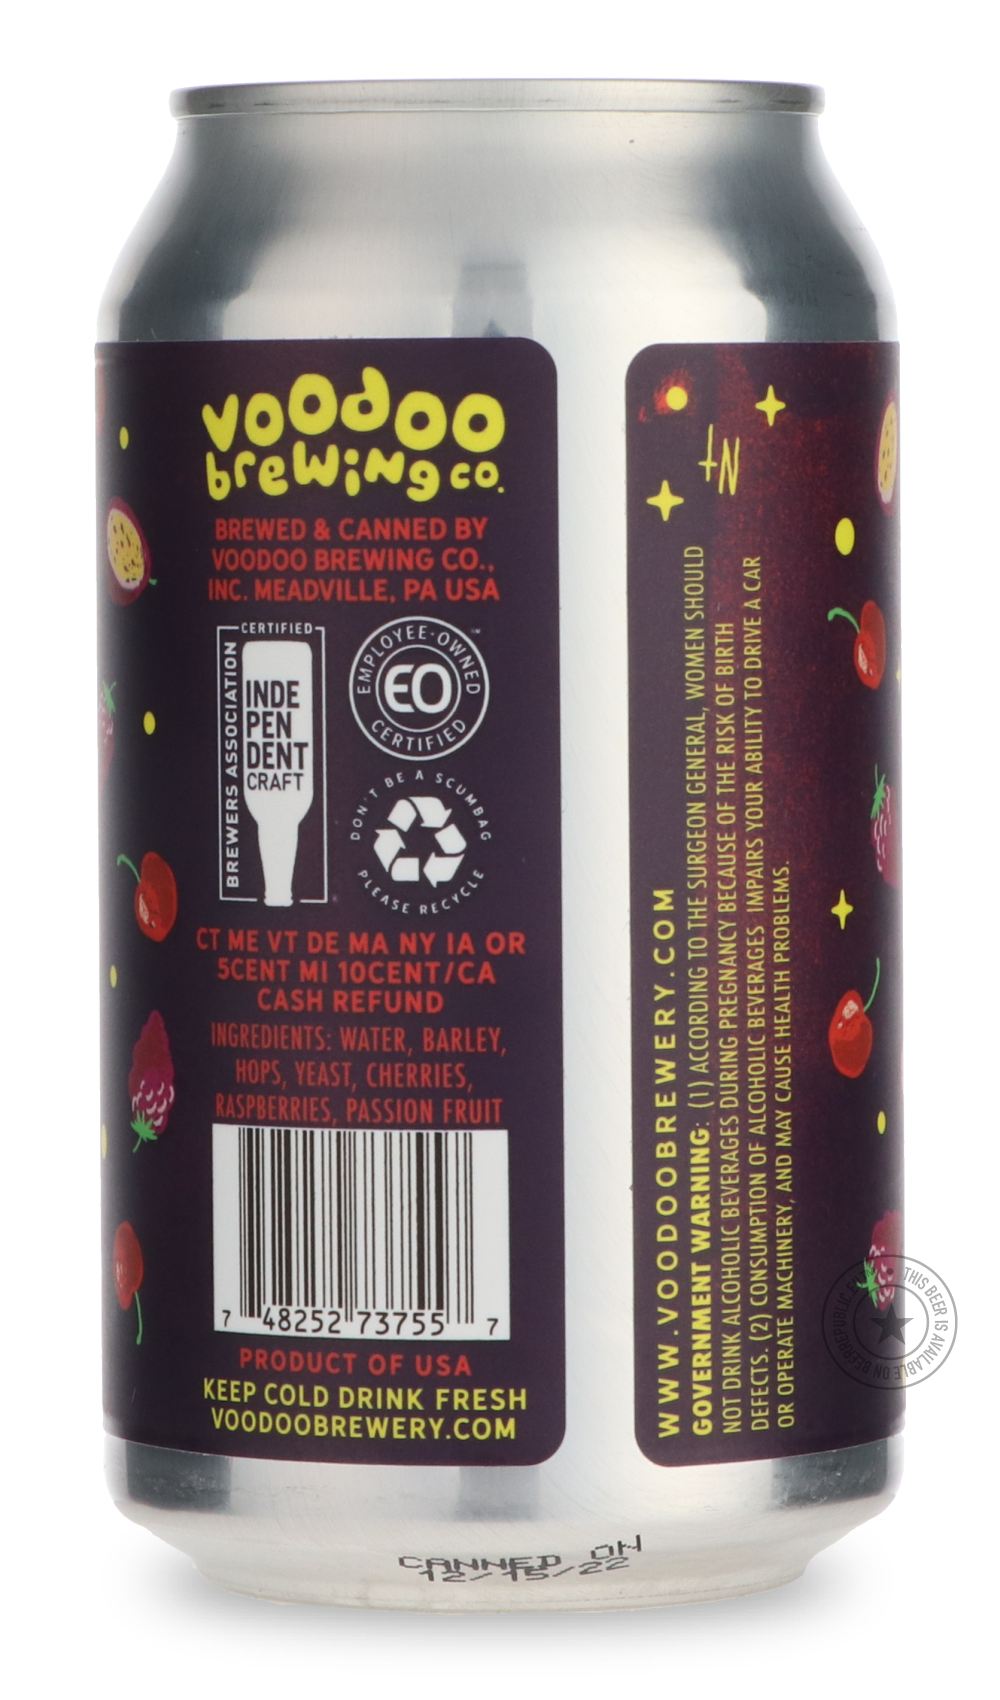 -Voodoo- Voodoo Love Child-Pale- Only @ Beer Republic - The best online beer store for American & Canadian craft beer - Buy beer online from the USA and Canada - Bier online kopen - Amerikaans bier kopen - Craft beer store - Craft beer kopen - Amerikanisch bier kaufen - Bier online kaufen - Acheter biere online - IPA - Stout - Porter - New England IPA - Hazy IPA - Imperial Stout - Barrel Aged - Barrel Aged Imperial Stout - Brown - Dark beer - Blond - Blonde - Pilsner - Lager - Wheat - Weizen - Amber - Barle